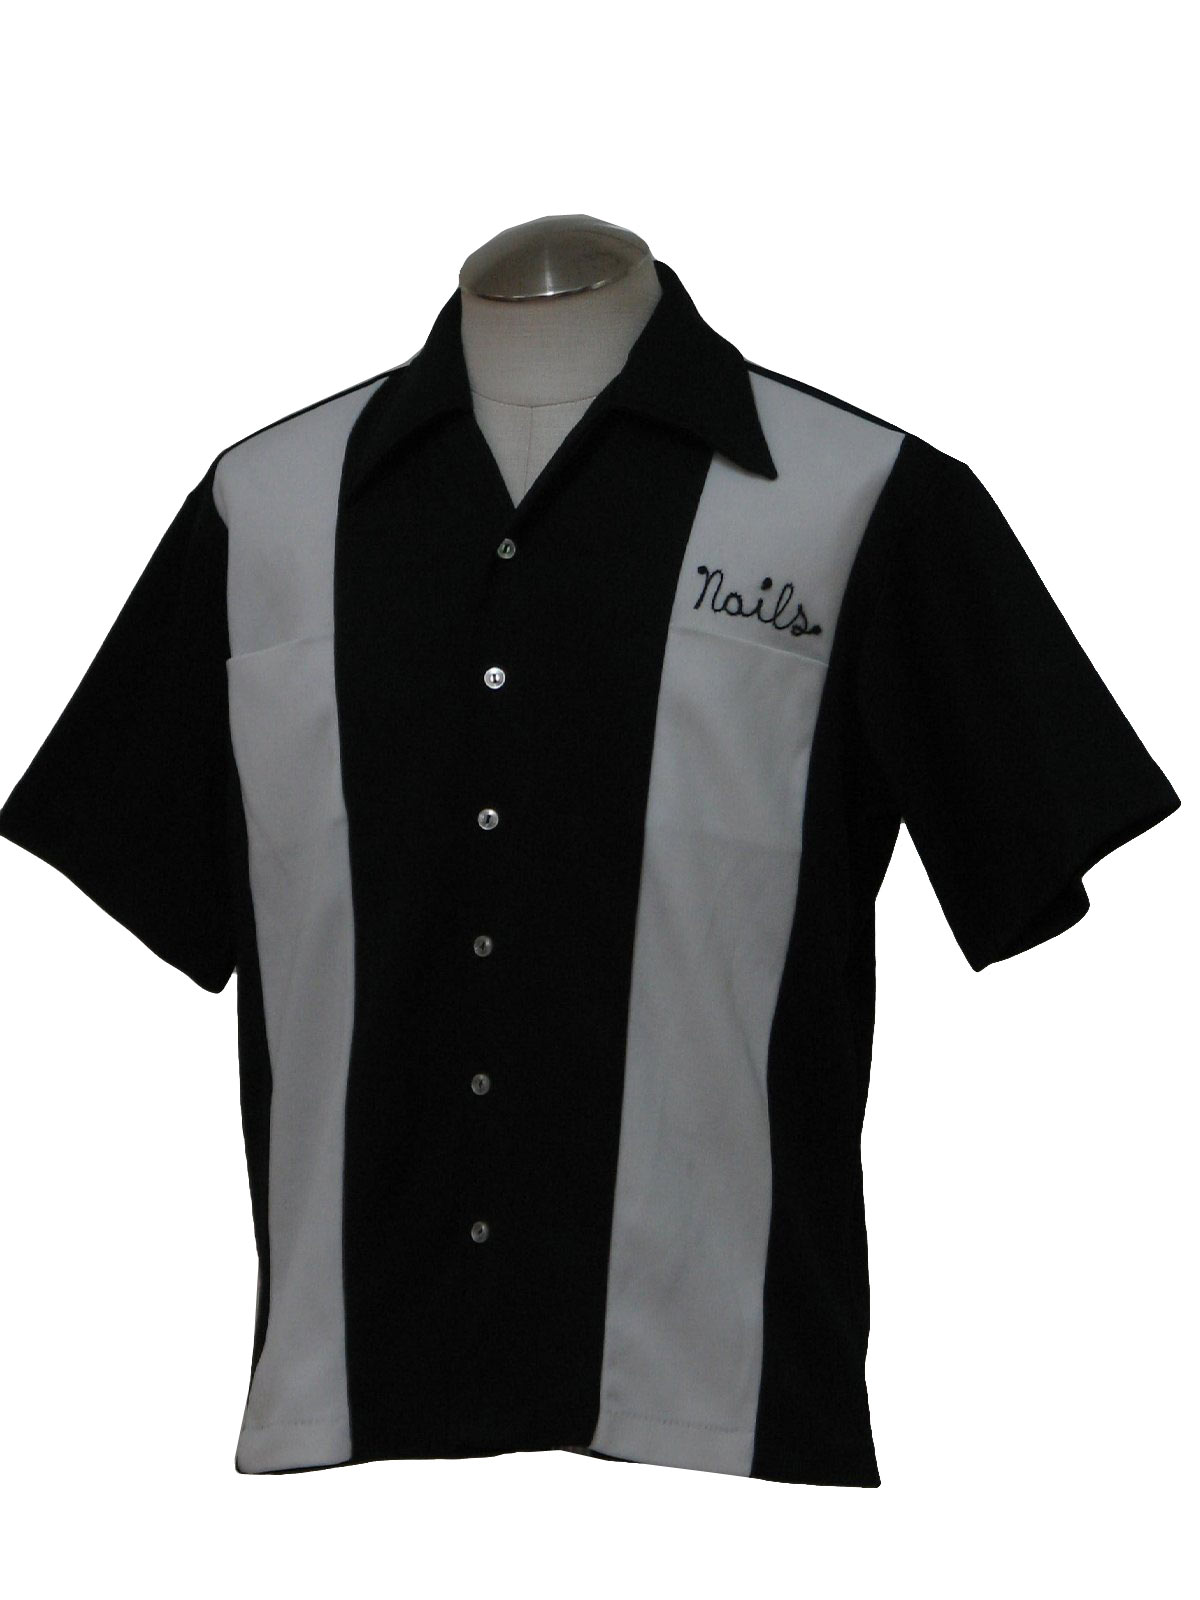 Embroidered bowling shirt - TheFind